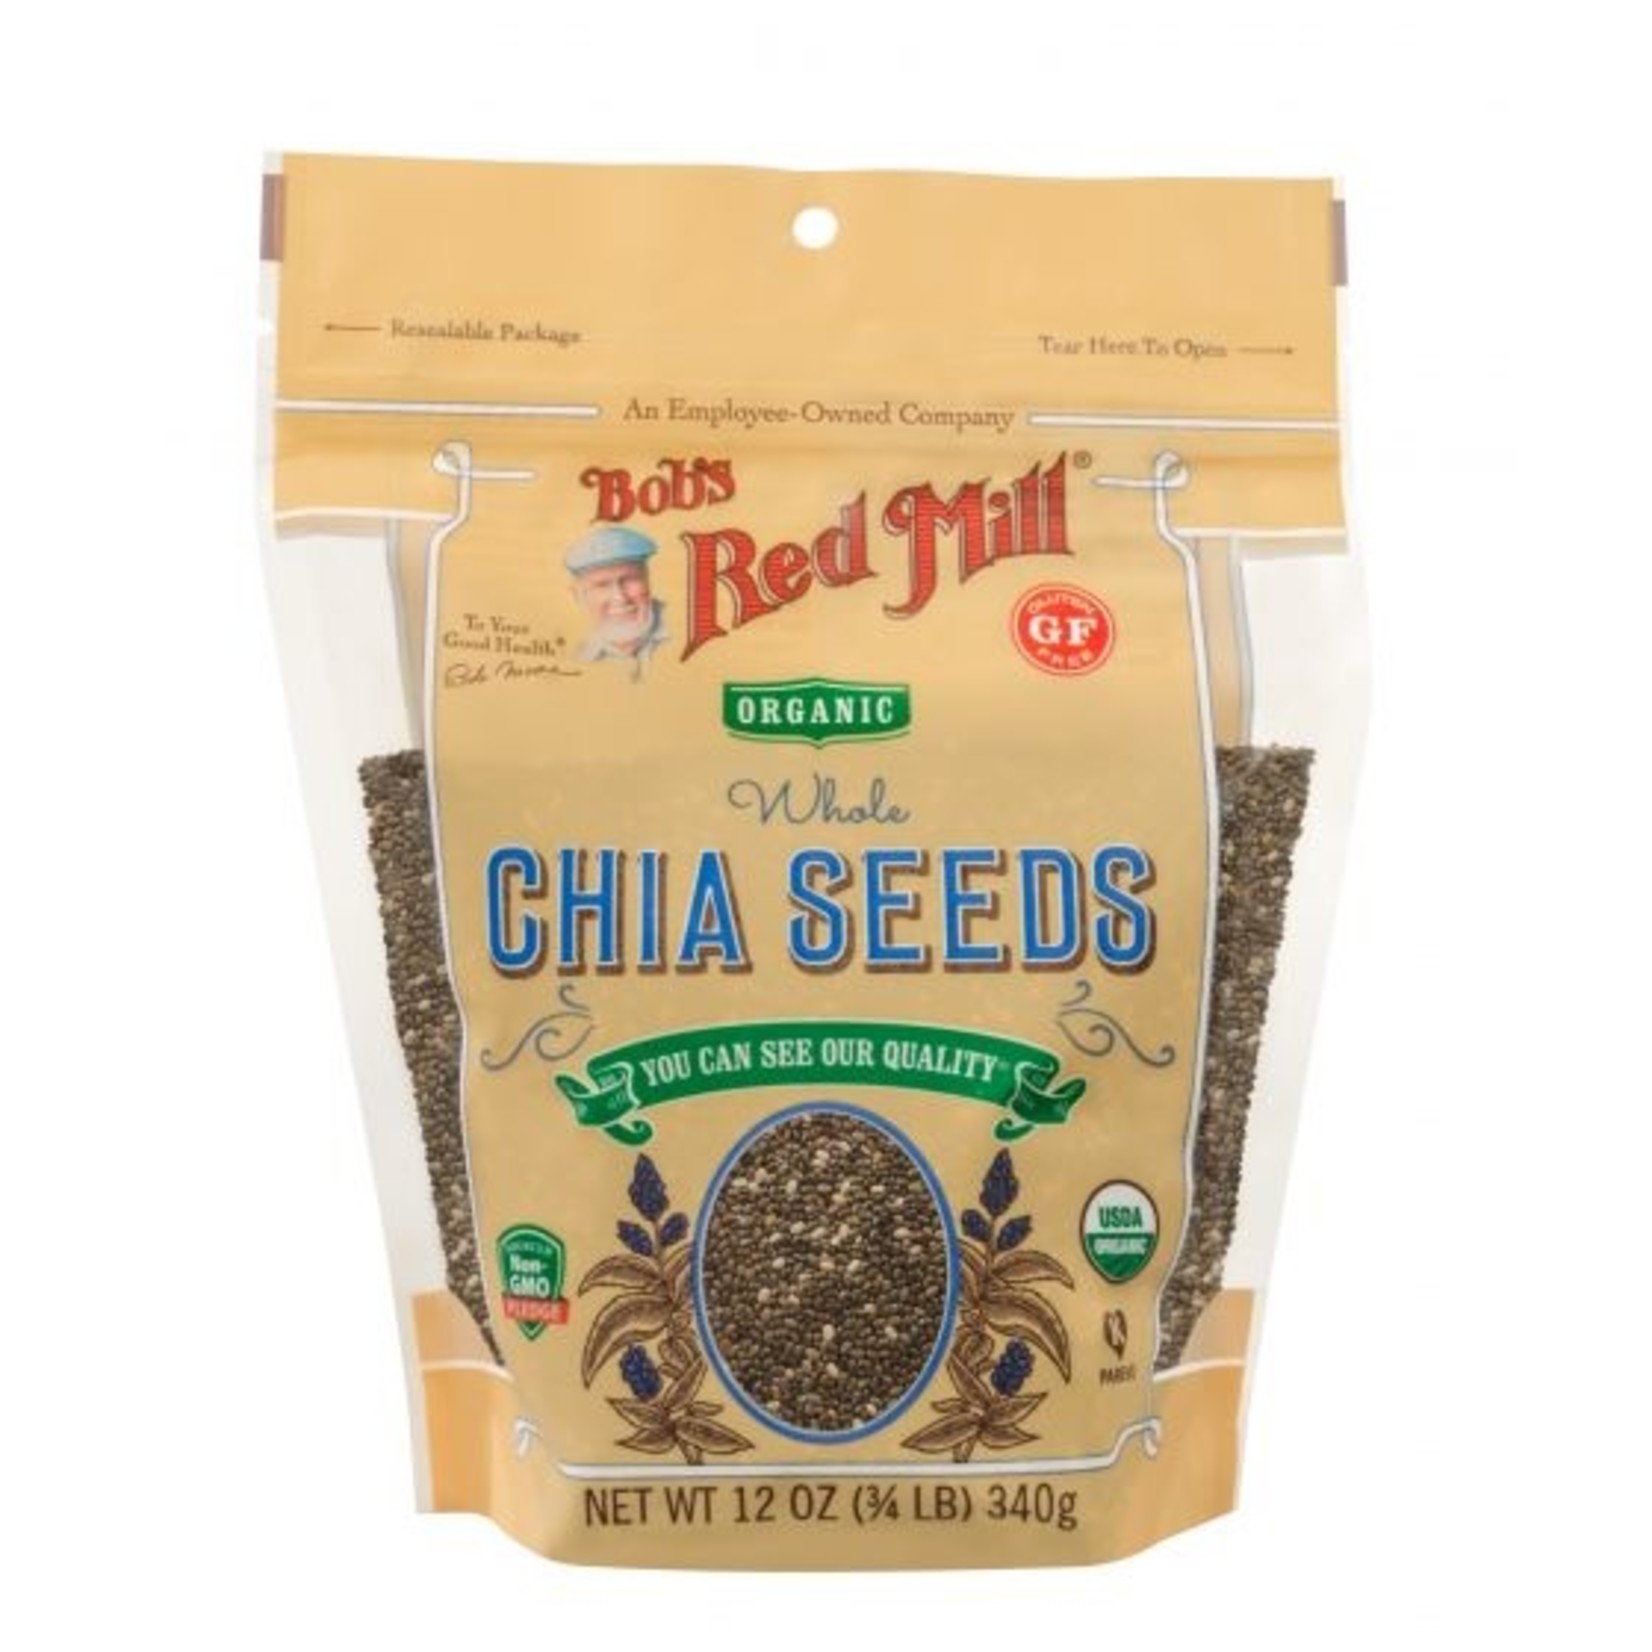 Bobs Red Mill Bobs Red Mill - Chia Seeds - 12 oz